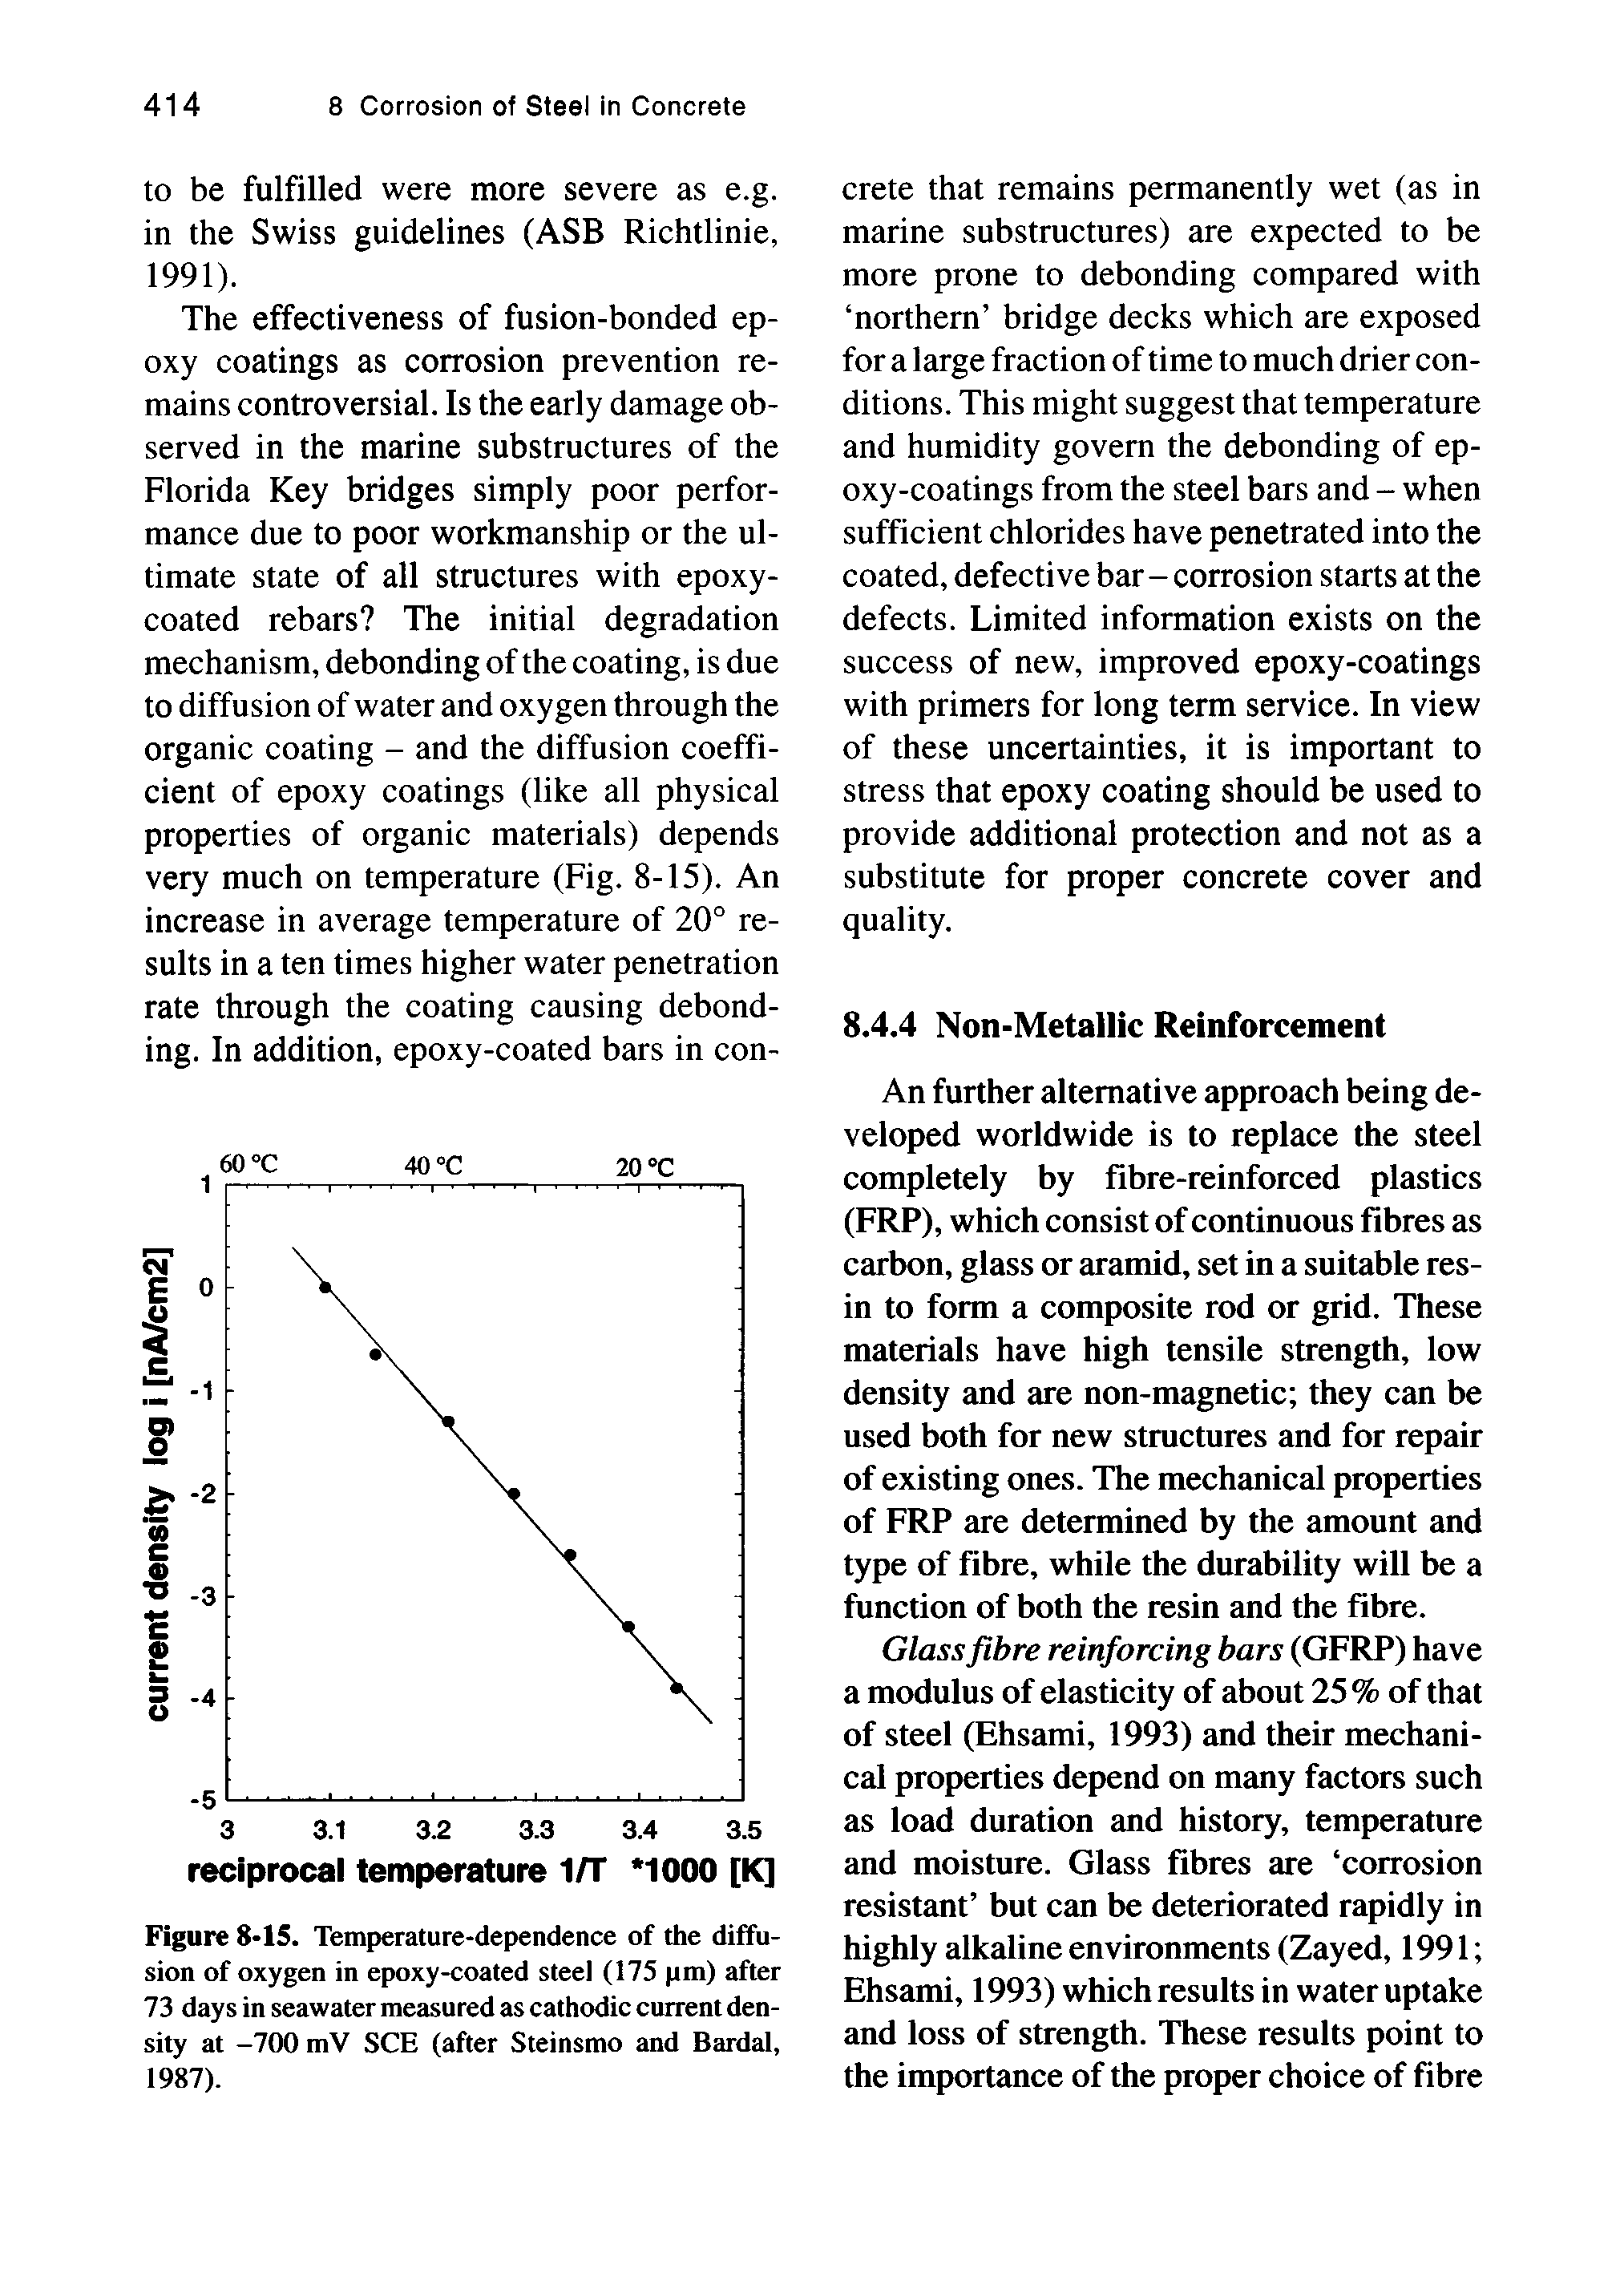 Figure 8>15. Temperature-dependence of the diffusion of oxygen in epoxy-coated steel (175 pm) after 73 days in seawater measured as cathodic current density at -700 mV SCE (after Steinsmo and Bardal, 1987).